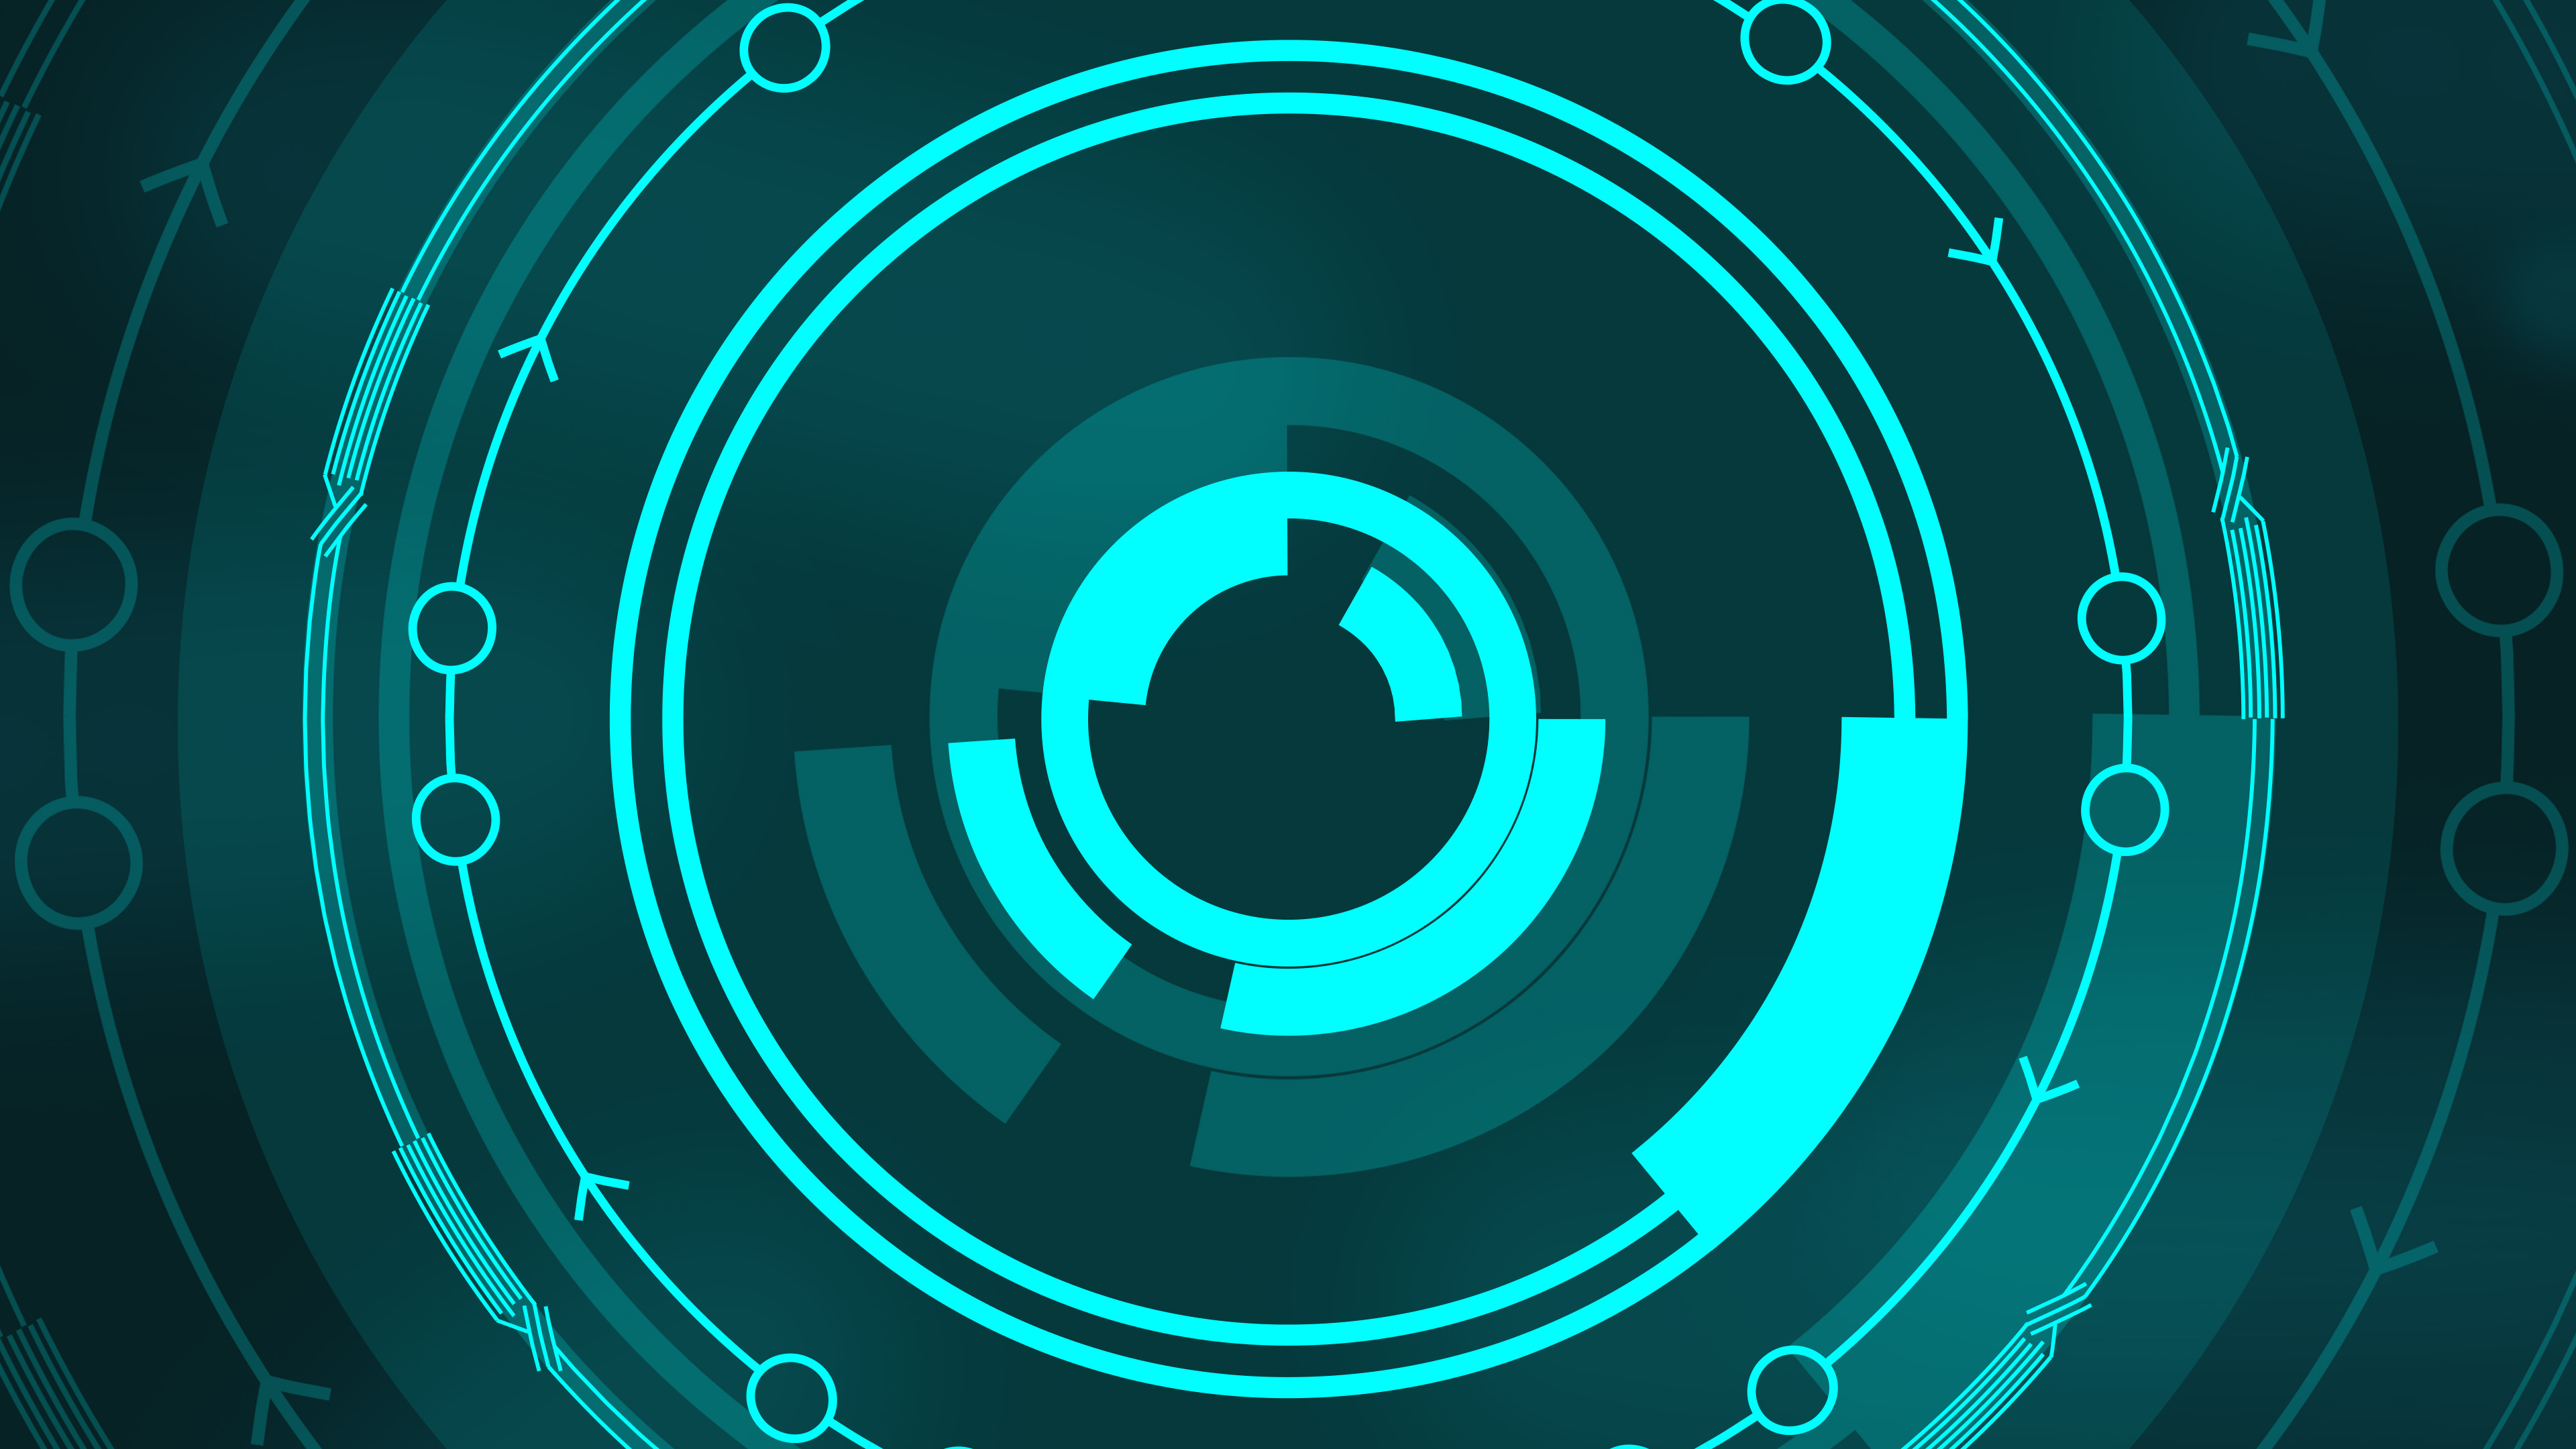 Seamless AI Integration Abstract Circle Patterns and Connecting Lines on Turquoise and Black Background